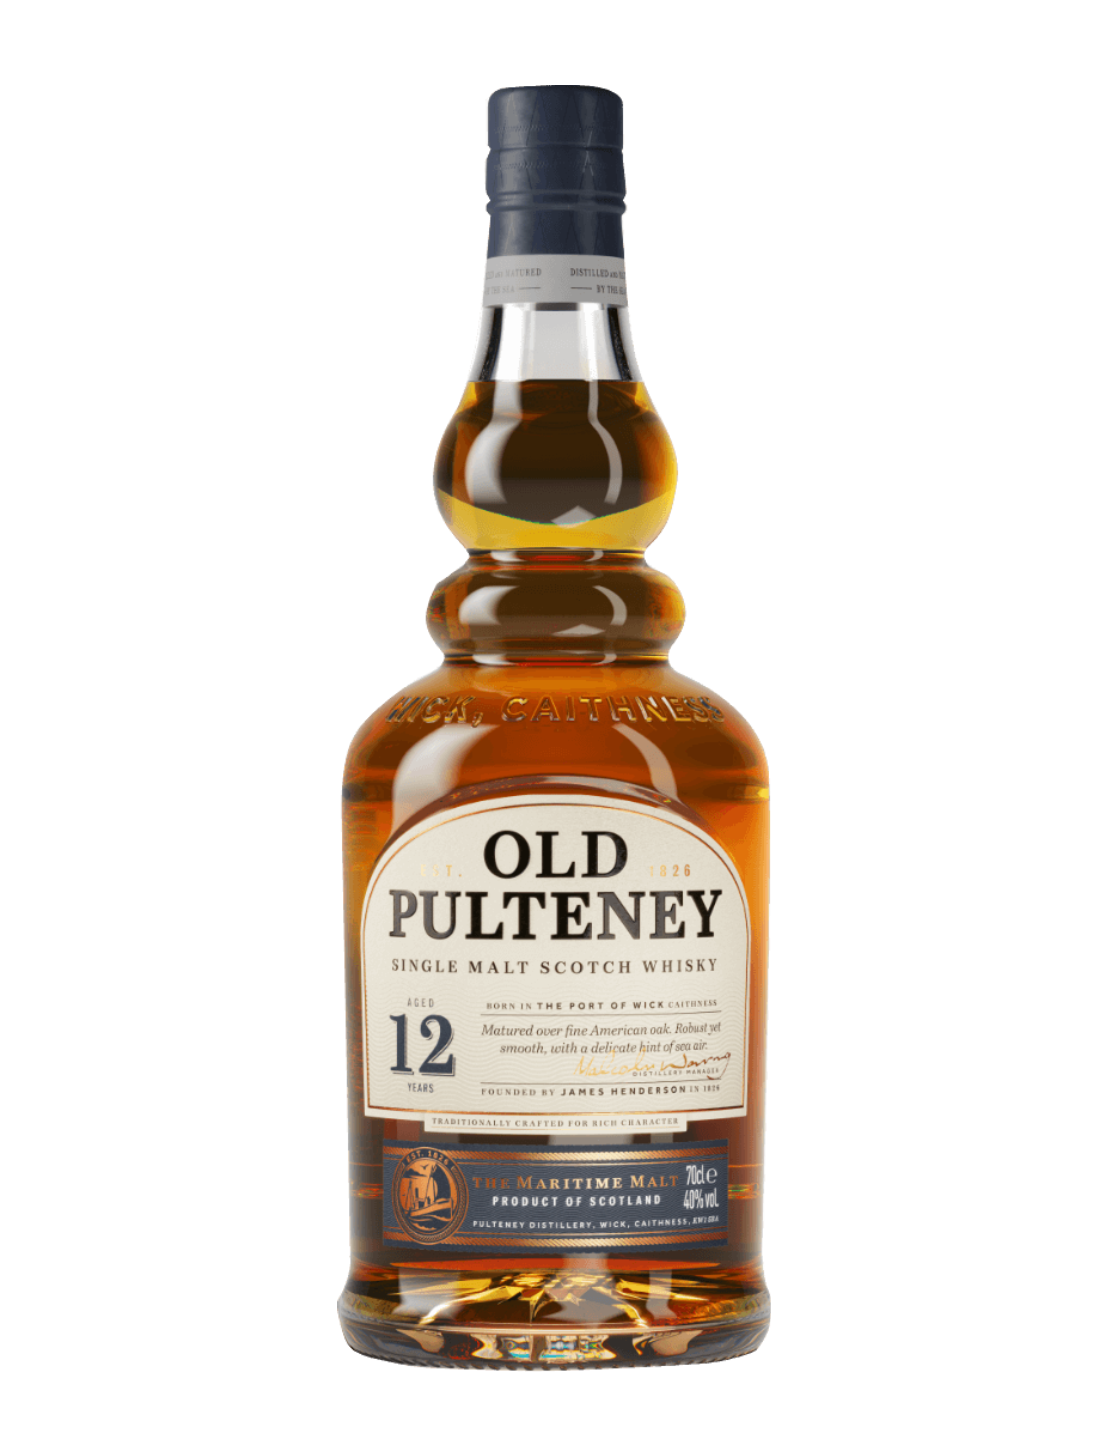 An elegant bottle of Old Pulteney 12 Year Old Single Malt Scotch in front of a plain white background